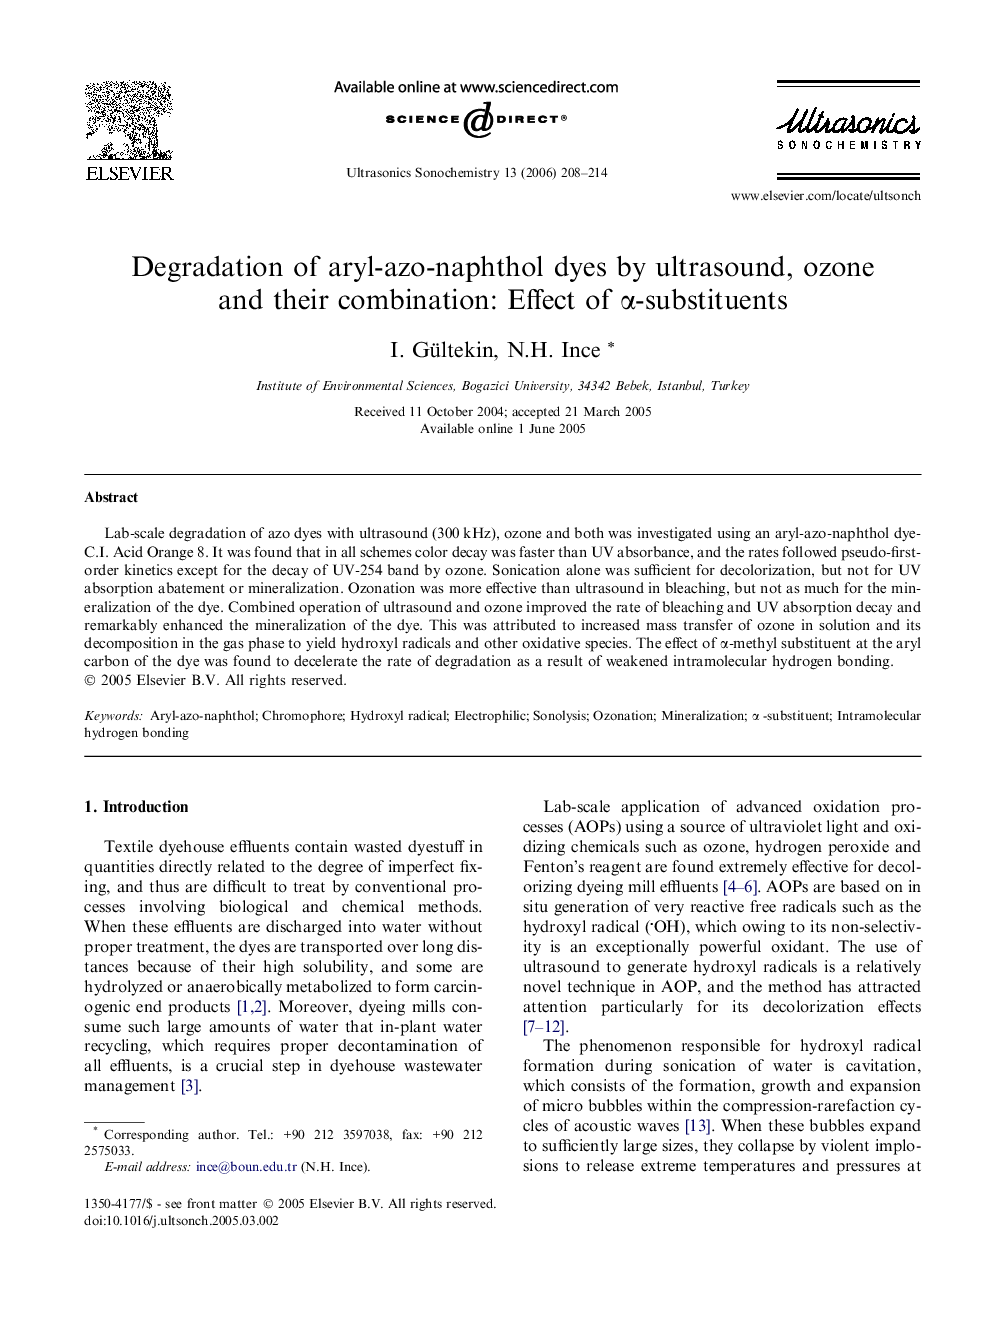 Degradation of aryl-azo-naphthol dyes by ultrasound, ozone and their combination: Effect of α-substituents